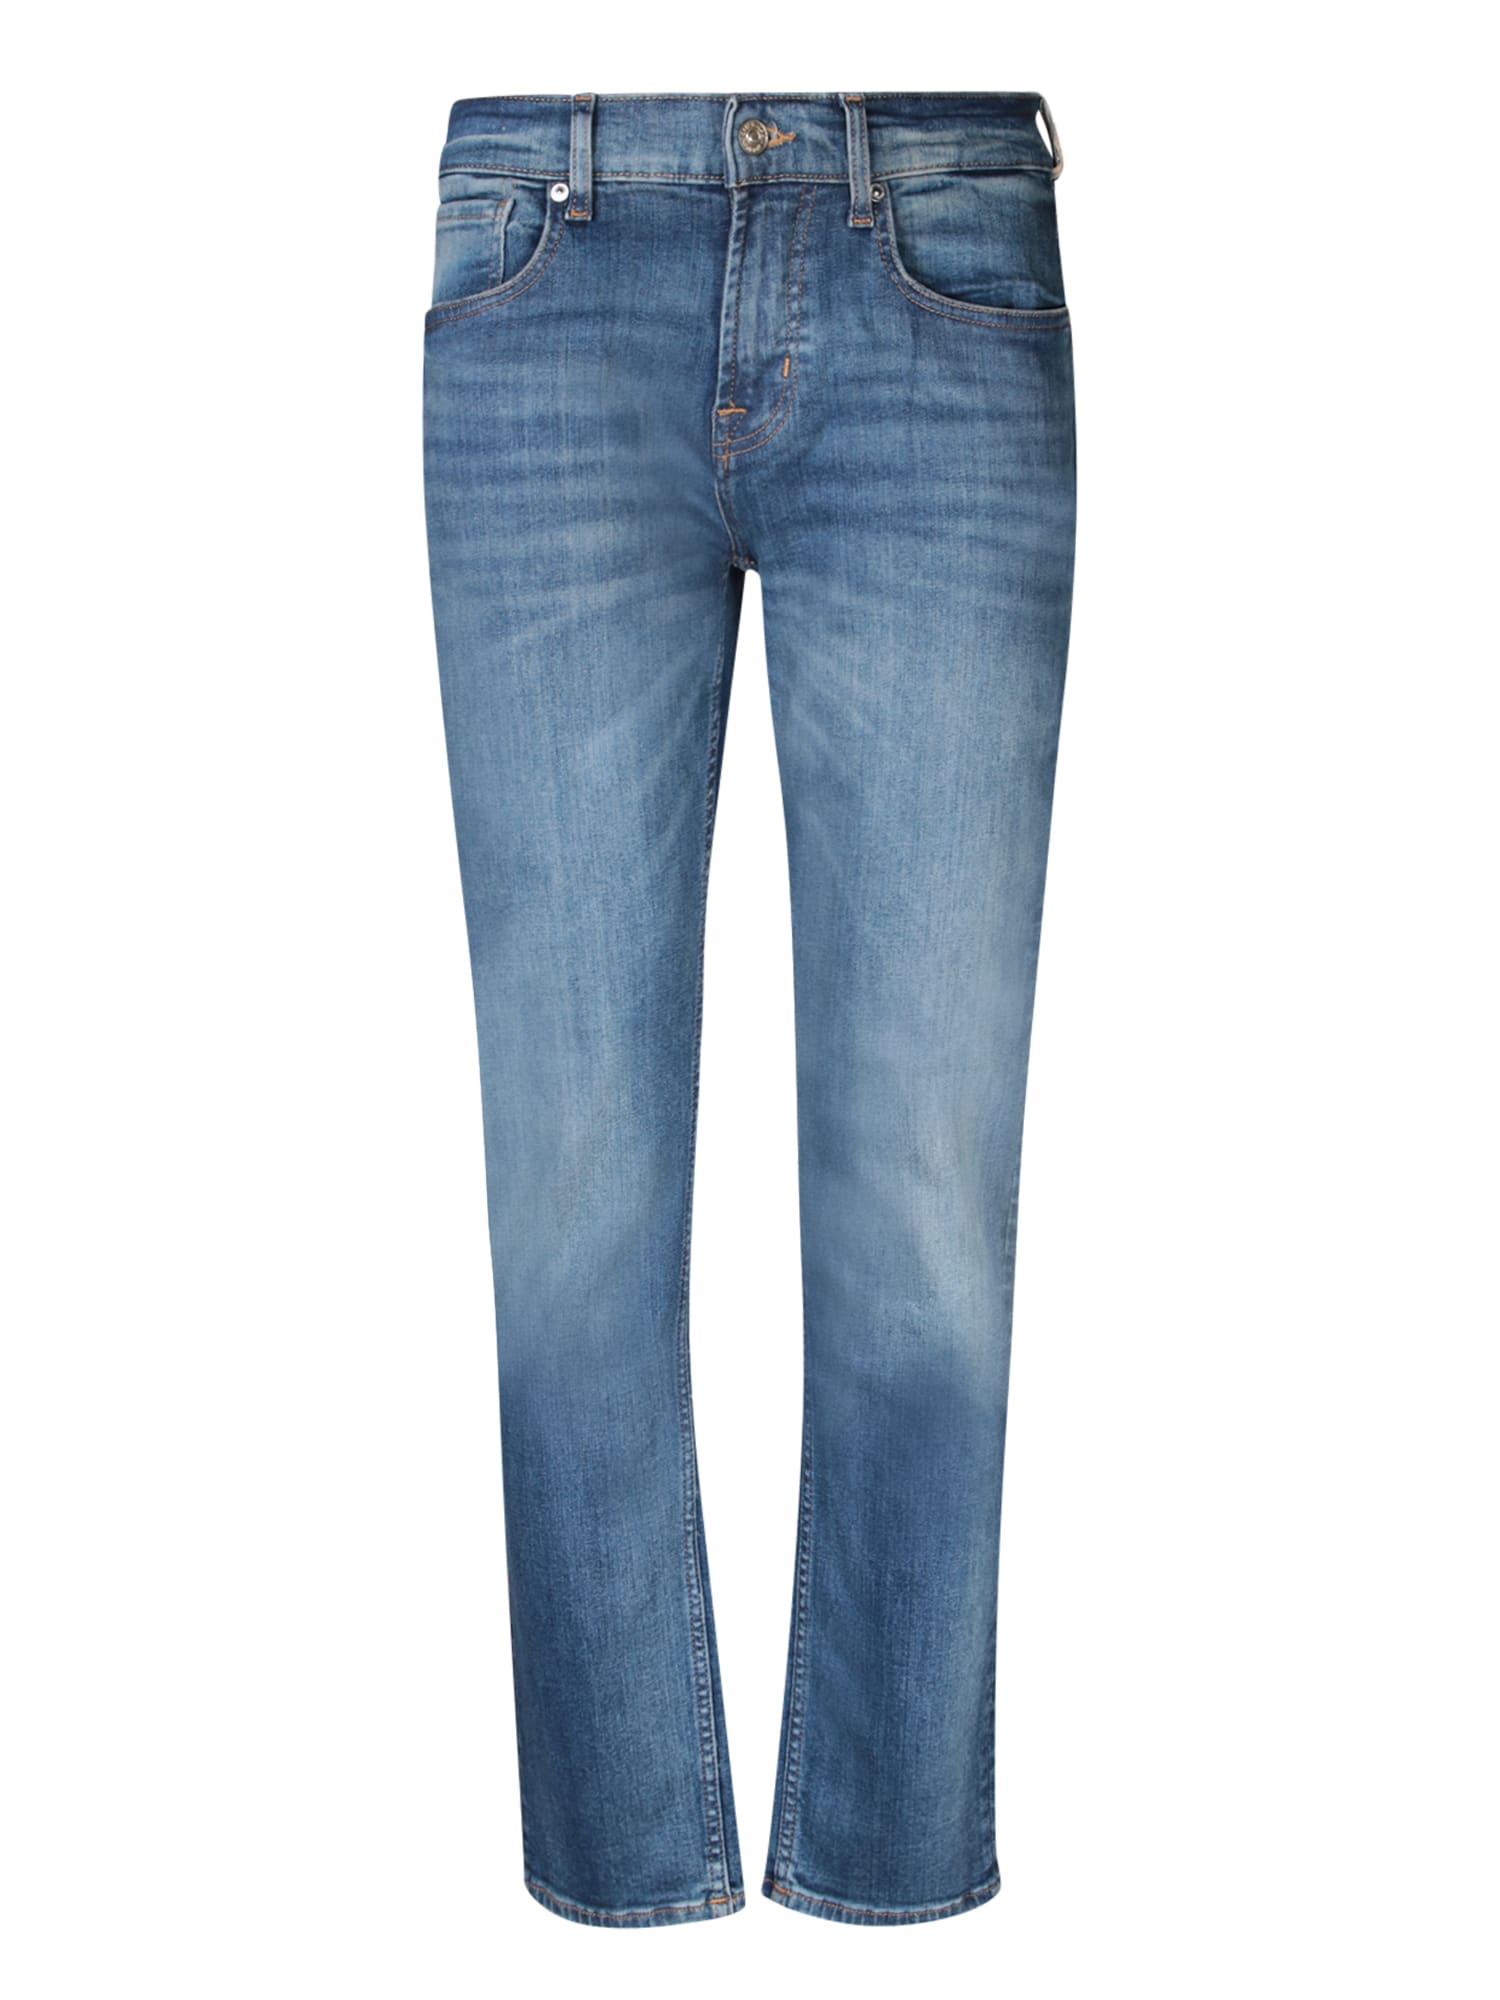 Shop 7 For All Mankind Slimmy Tapered Blue Jeans